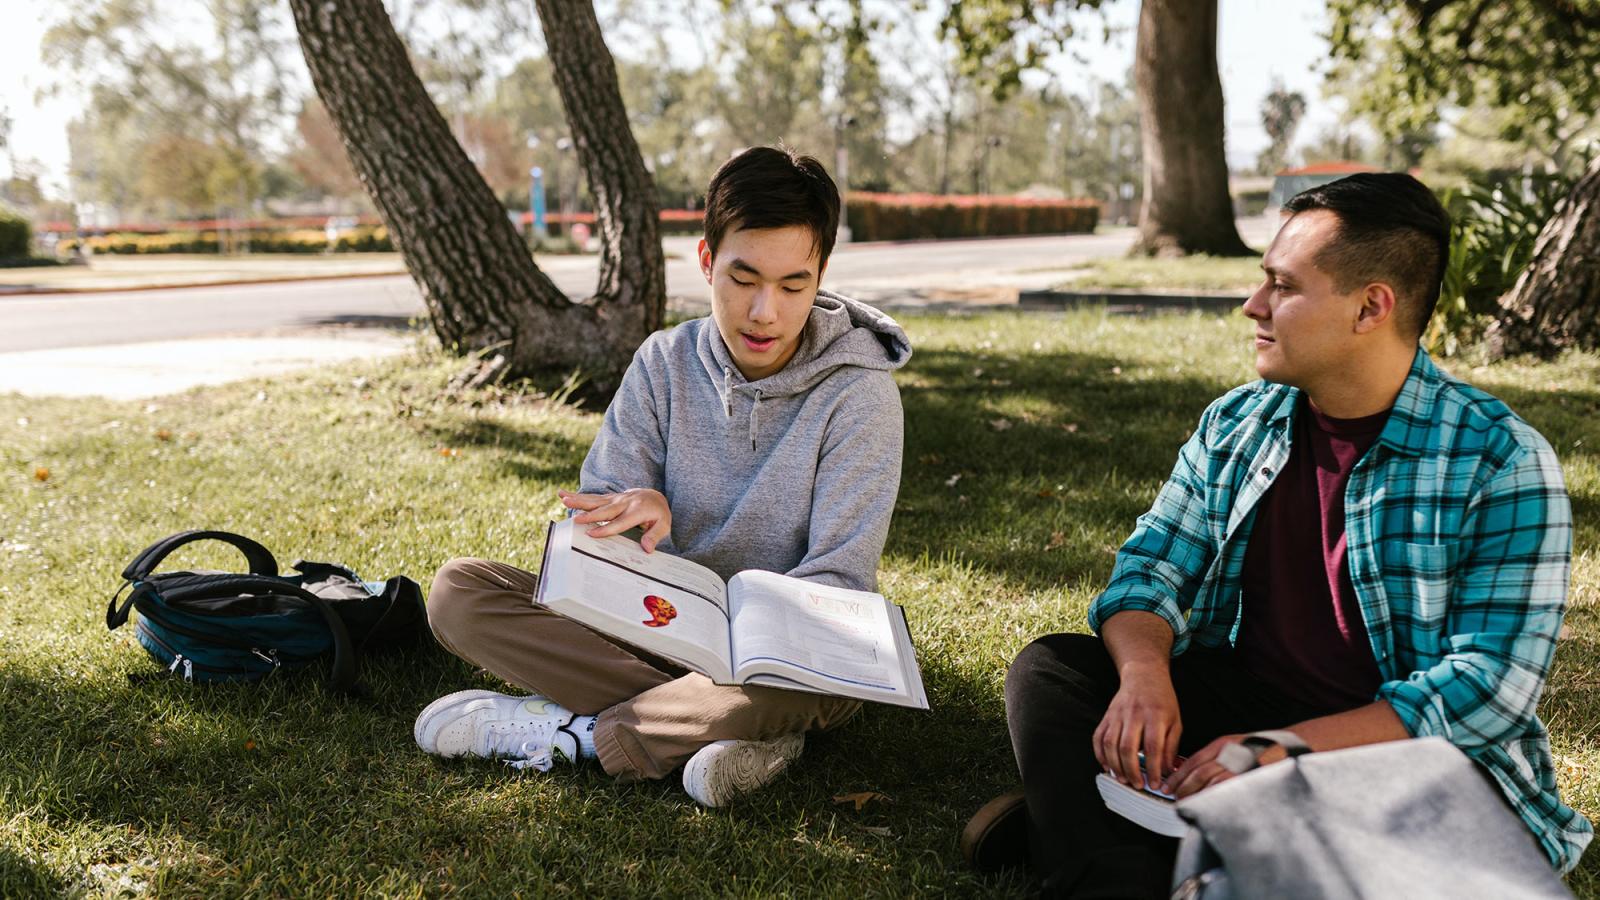 Two male students sitting on a grassy field, studying